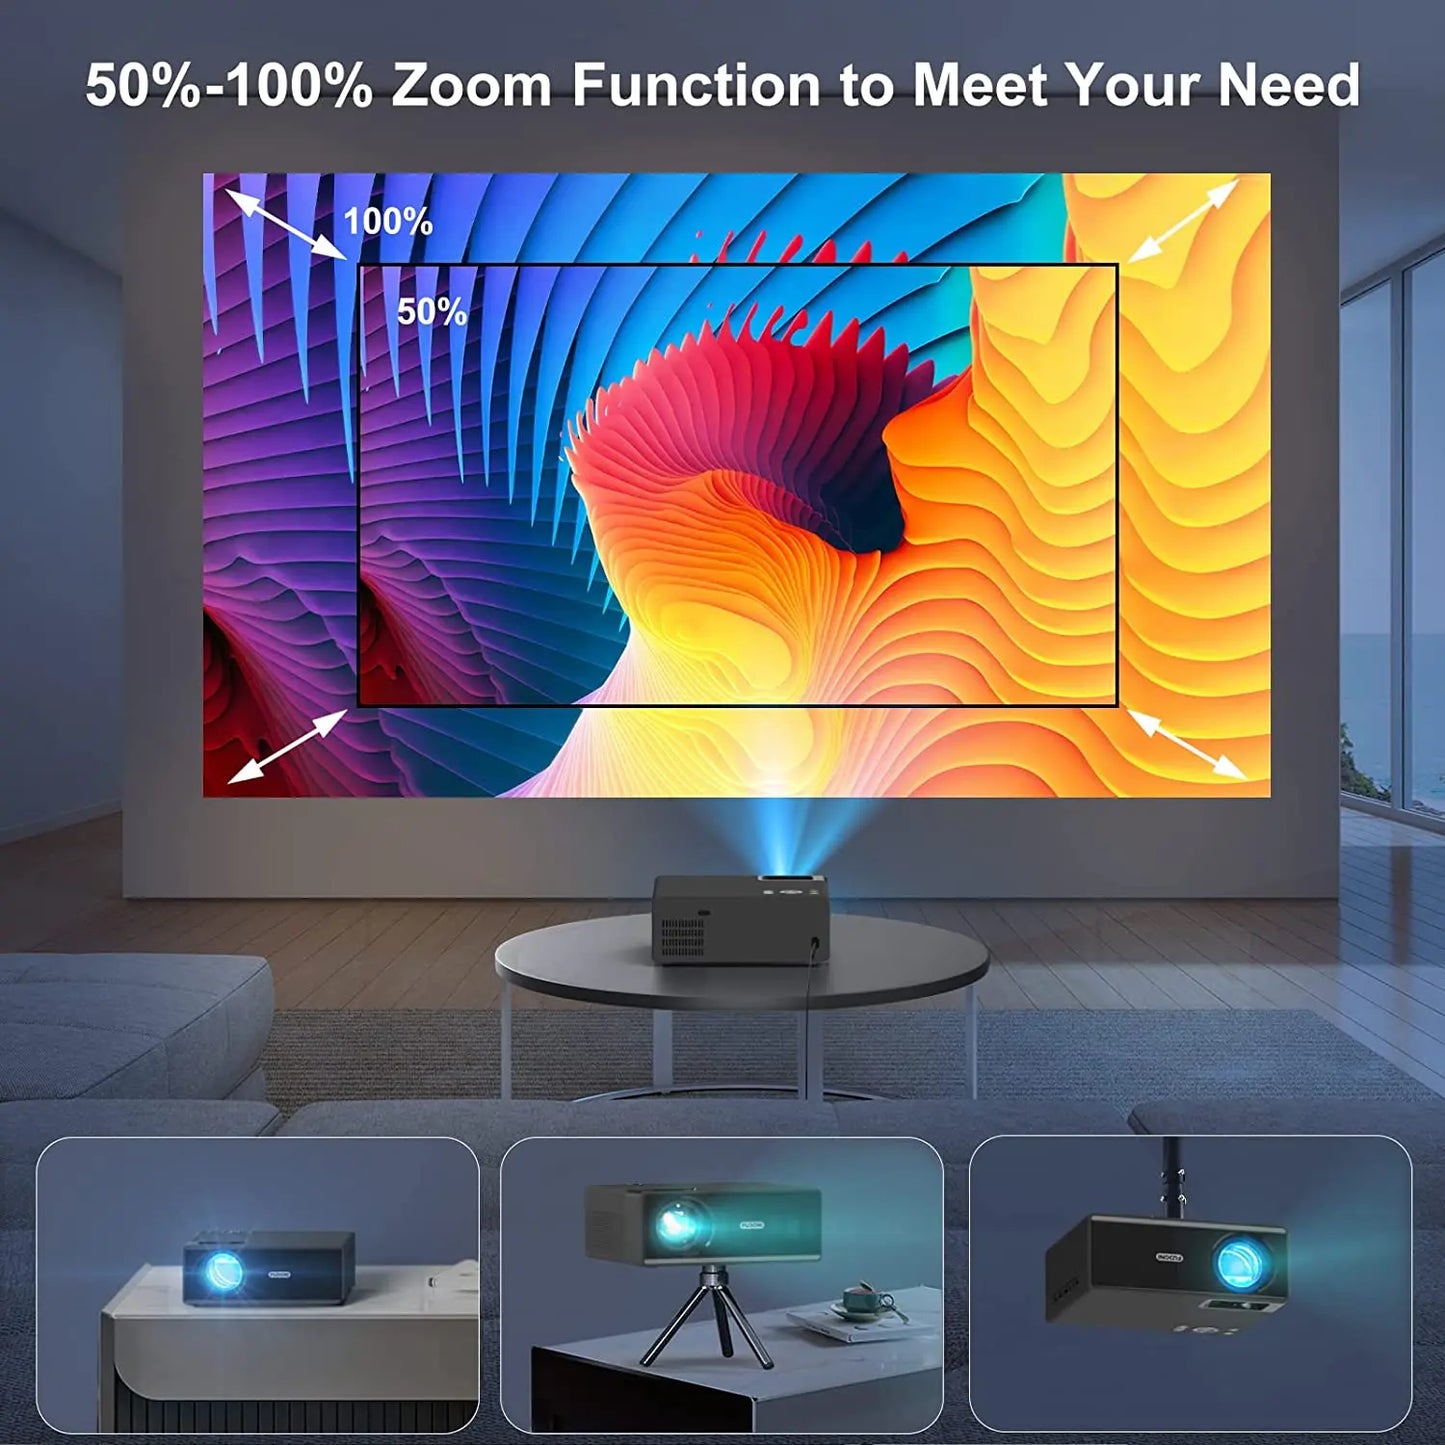 New Year Sale - Projector with WiFi and Bluetooth, Projector 4K Support Native 1080P Projector, 5G WiFi FUDONI Outdoor Projector with 400 ANSI Max 300" Display, Movie Projector Compatible w/iOS/Android/Win/PS5, Black FUDONI